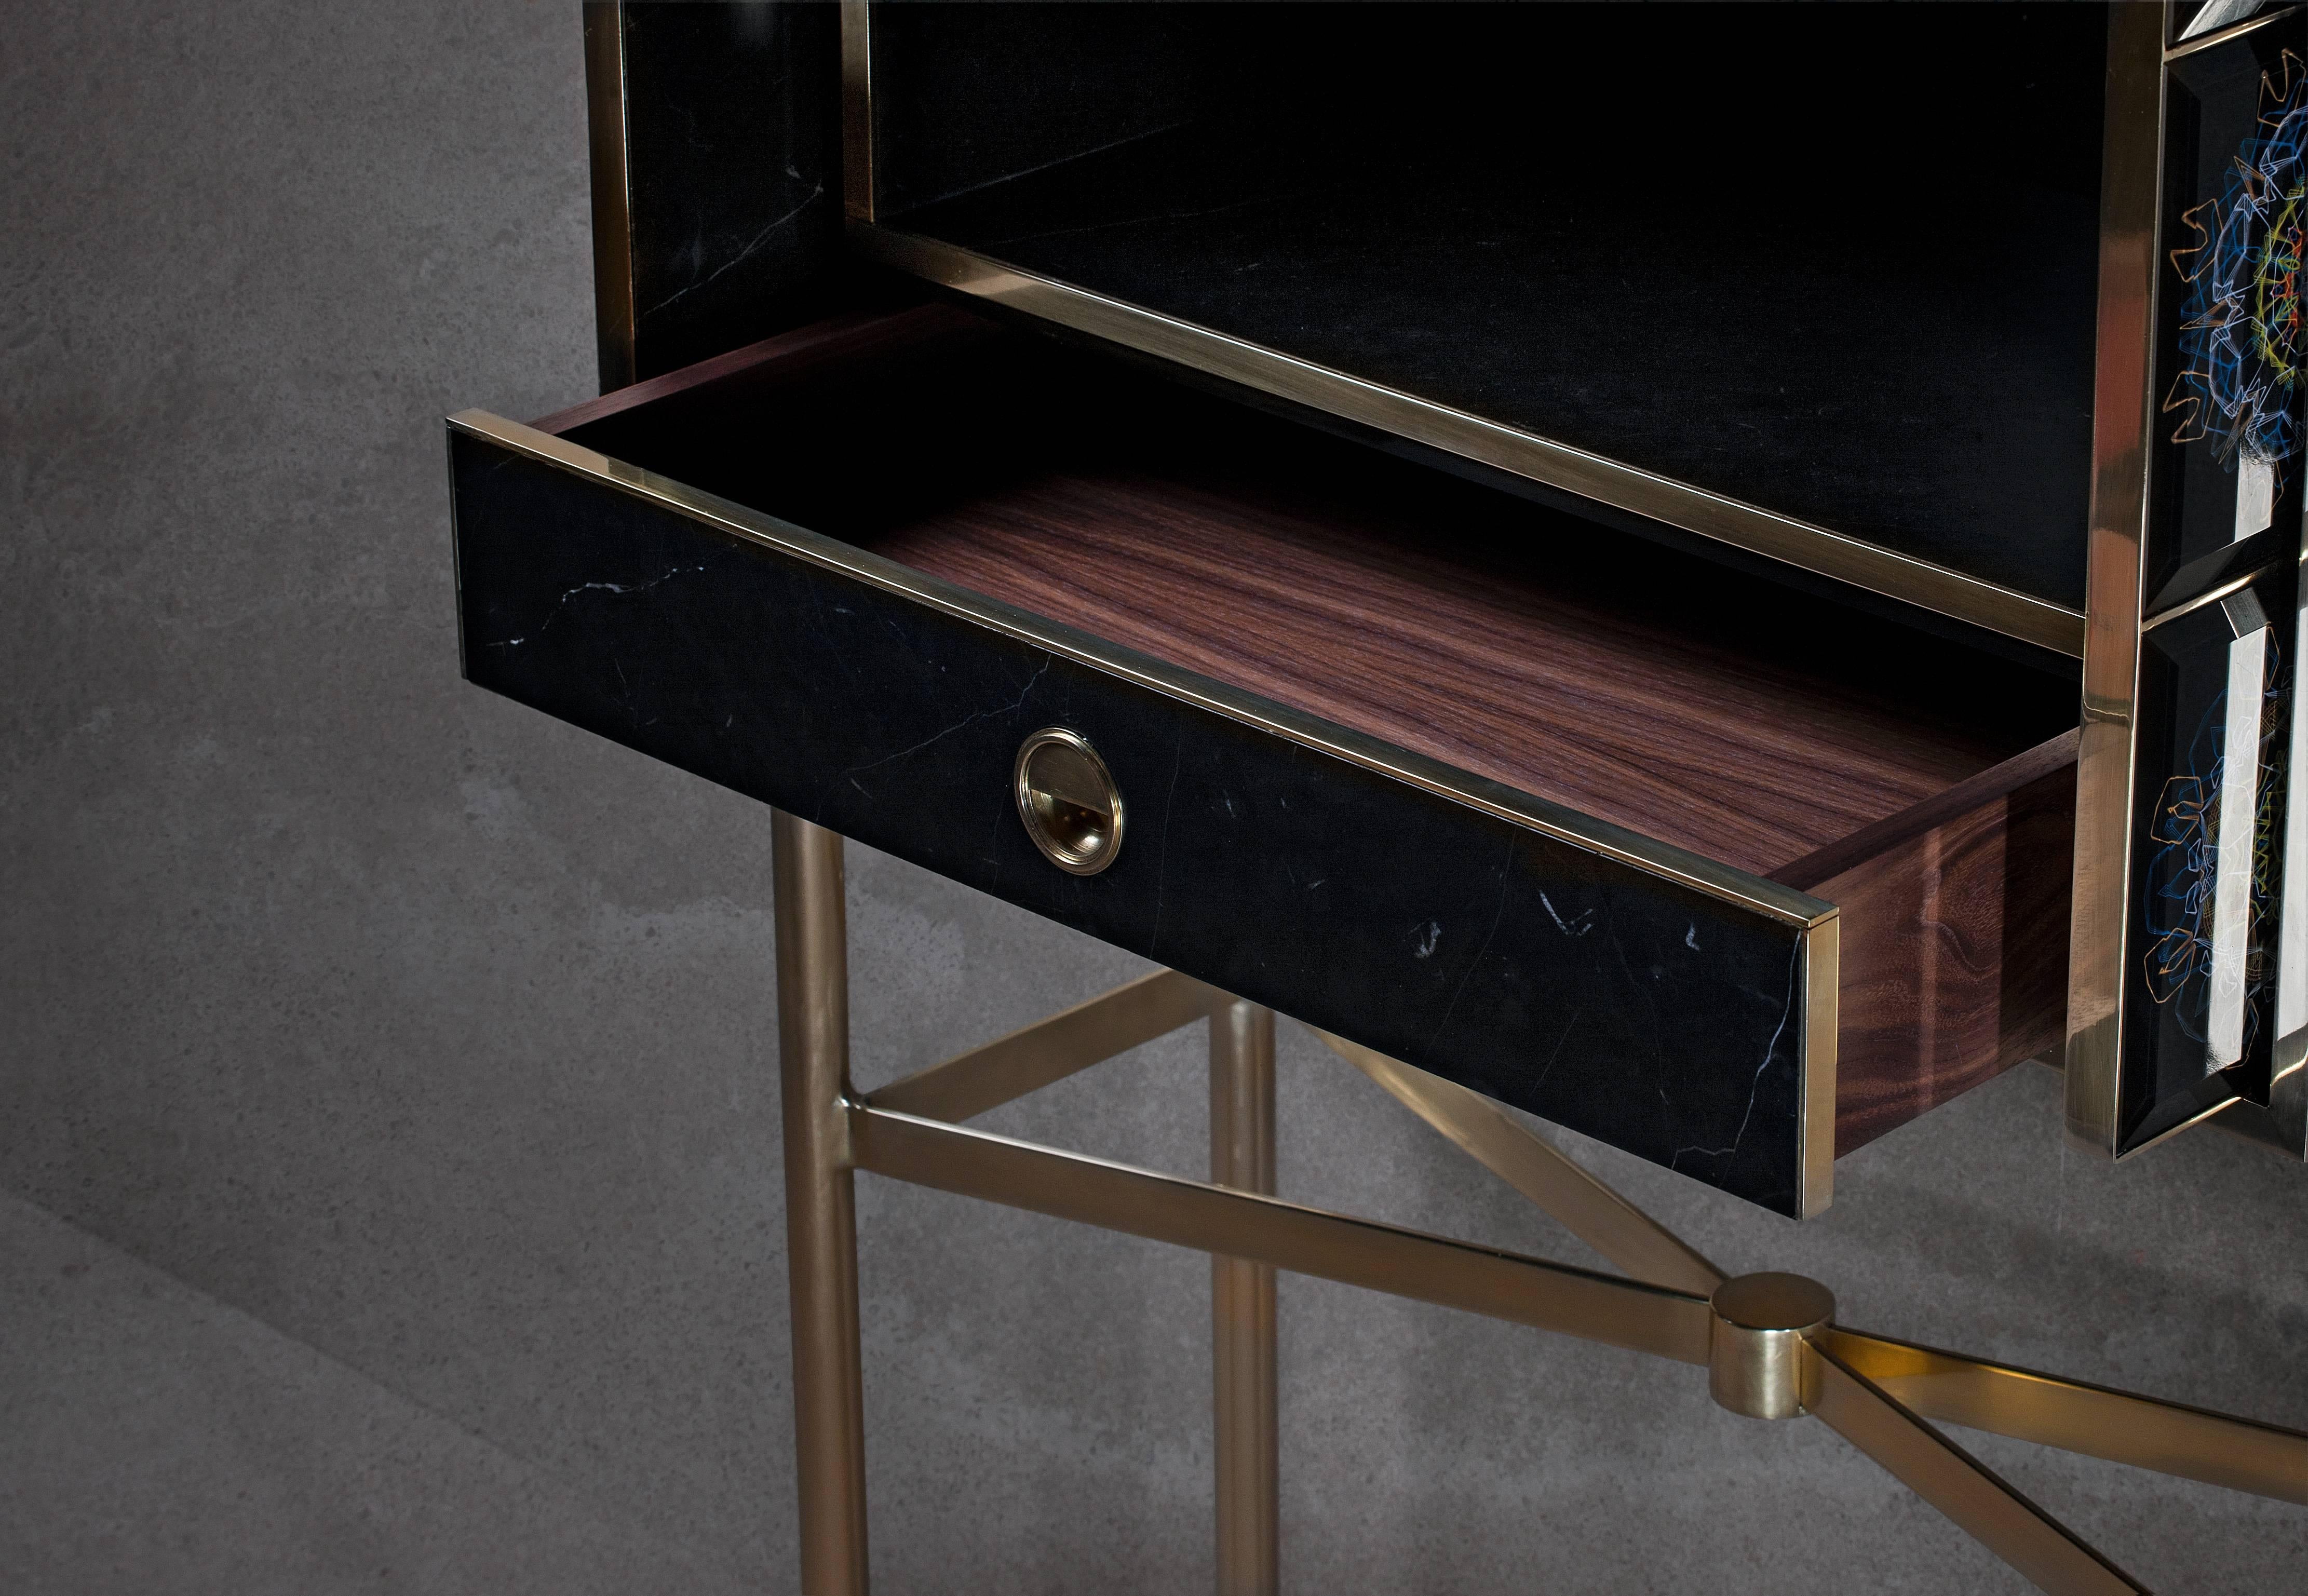 Other Limited Edition Cabinet I in Walnut, Ebony and Gem stones, handcrafted in Spain For Sale